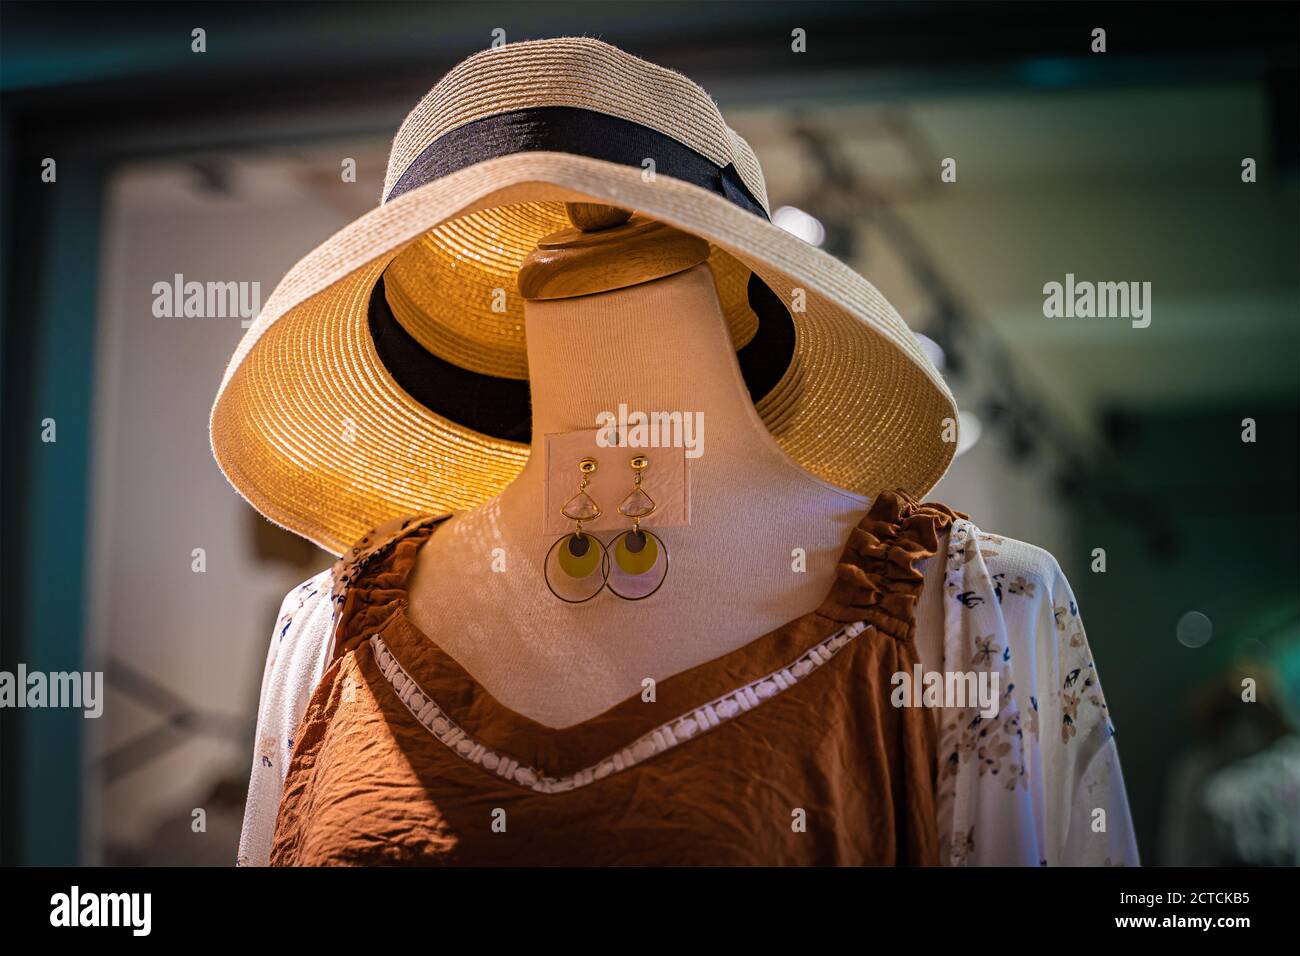 A model without head wearing new dress and a hat at a dress store in Tainan street. Stock Photo